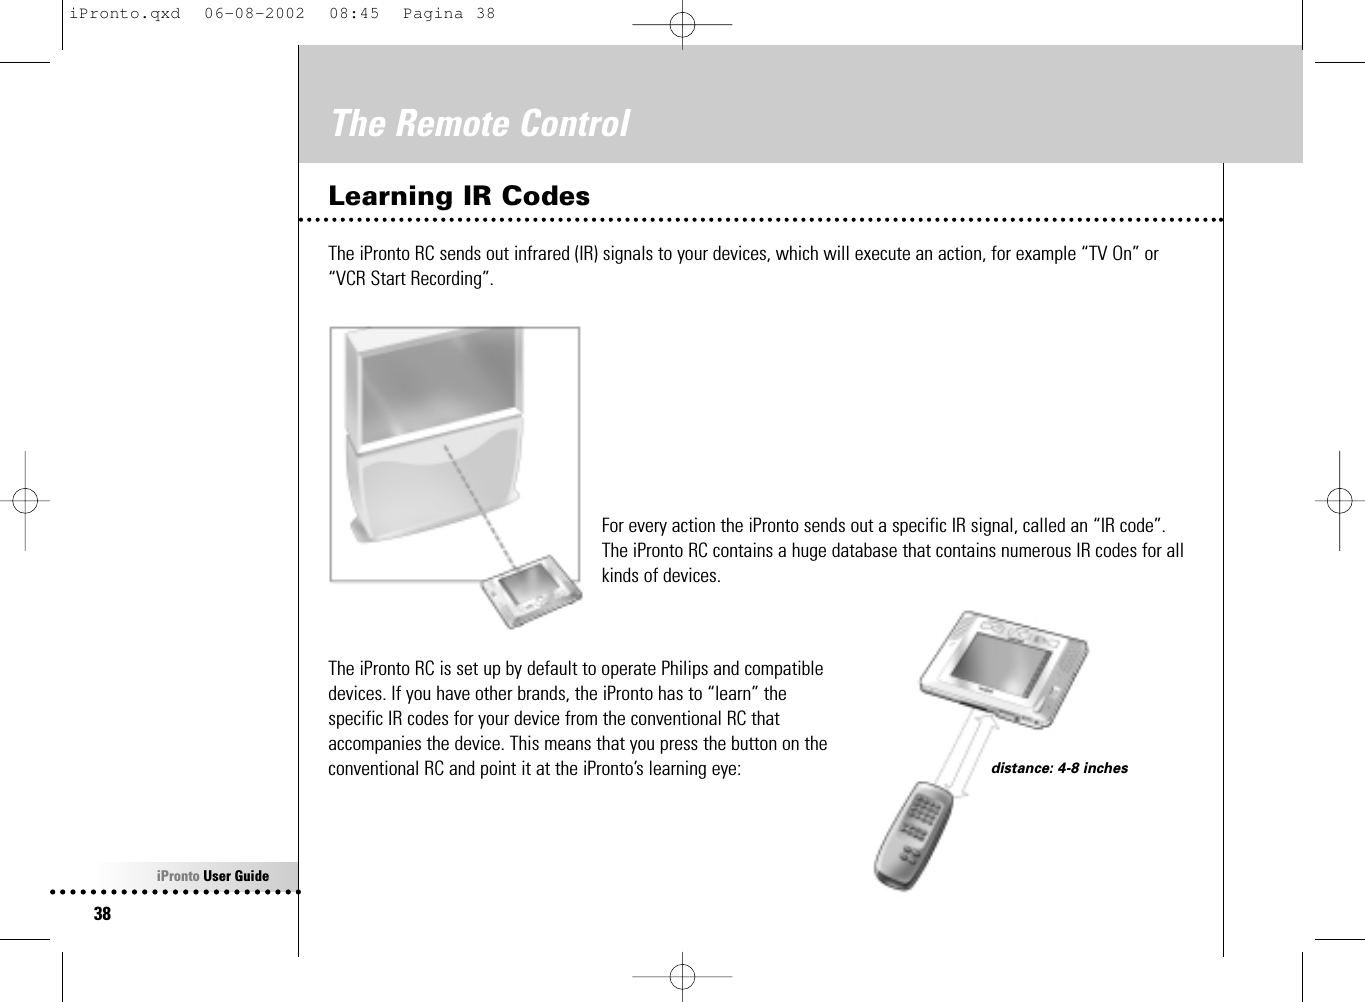 iPronto User Guide38The Remote ControlLearning IR CodesThe iPronto RC sends out infrared (IR) signals to your devices, which will execute an action, for example “TV On” or“VCR Start Recording”.For every action the iPronto sends out a specific IR signal, called an “IR code”.The iPronto RC contains a huge database that contains numerous IR codes for allkinds of devices.The iPronto RC is set up by default to operate Philips and compatibledevices. If you have other brands, the iPronto has to “learn” thespecific IR codes for your device from the conventional RC thataccompanies the device. This means that you press the button on theconventional RC and point it at the iPronto’s learning eye: distance: 4-8 inchesiPronto.qxd  06-08-2002  08:45  Pagina 38